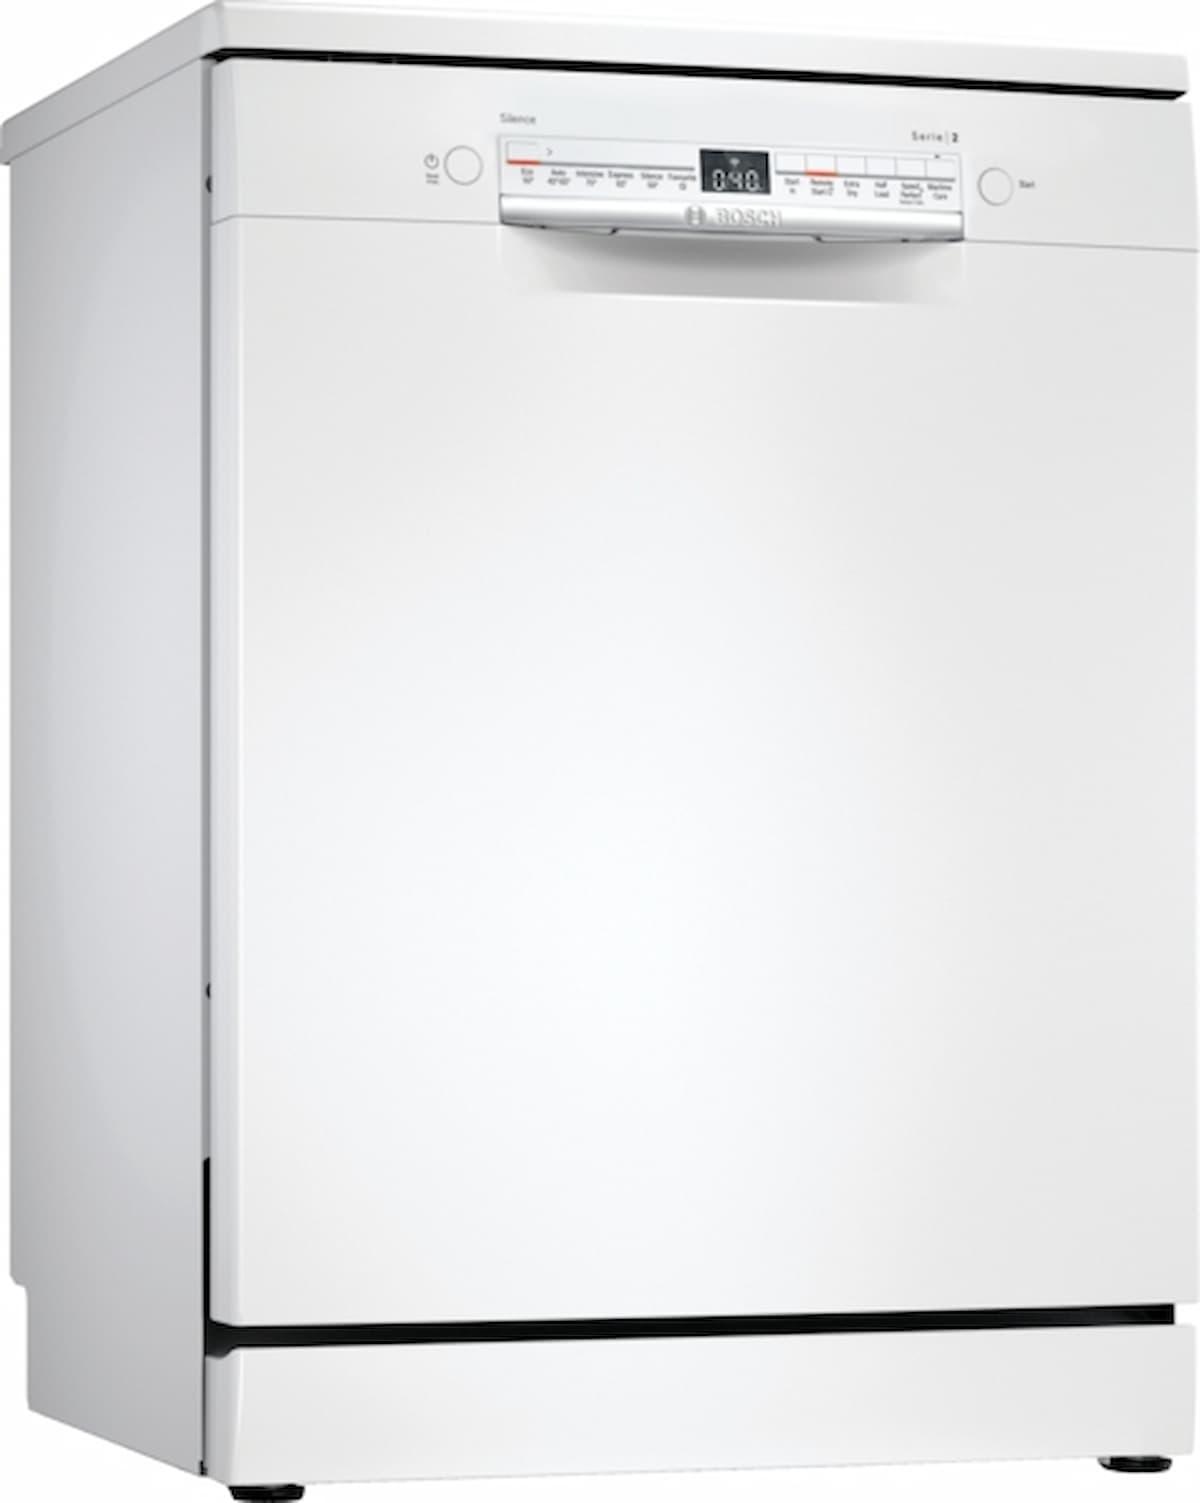 Bosch Home Connect Serie 2, 60cm, Dishwasher, White, | SMS2HVW66G - Peter Murphy Lighting & Electrical Ltd